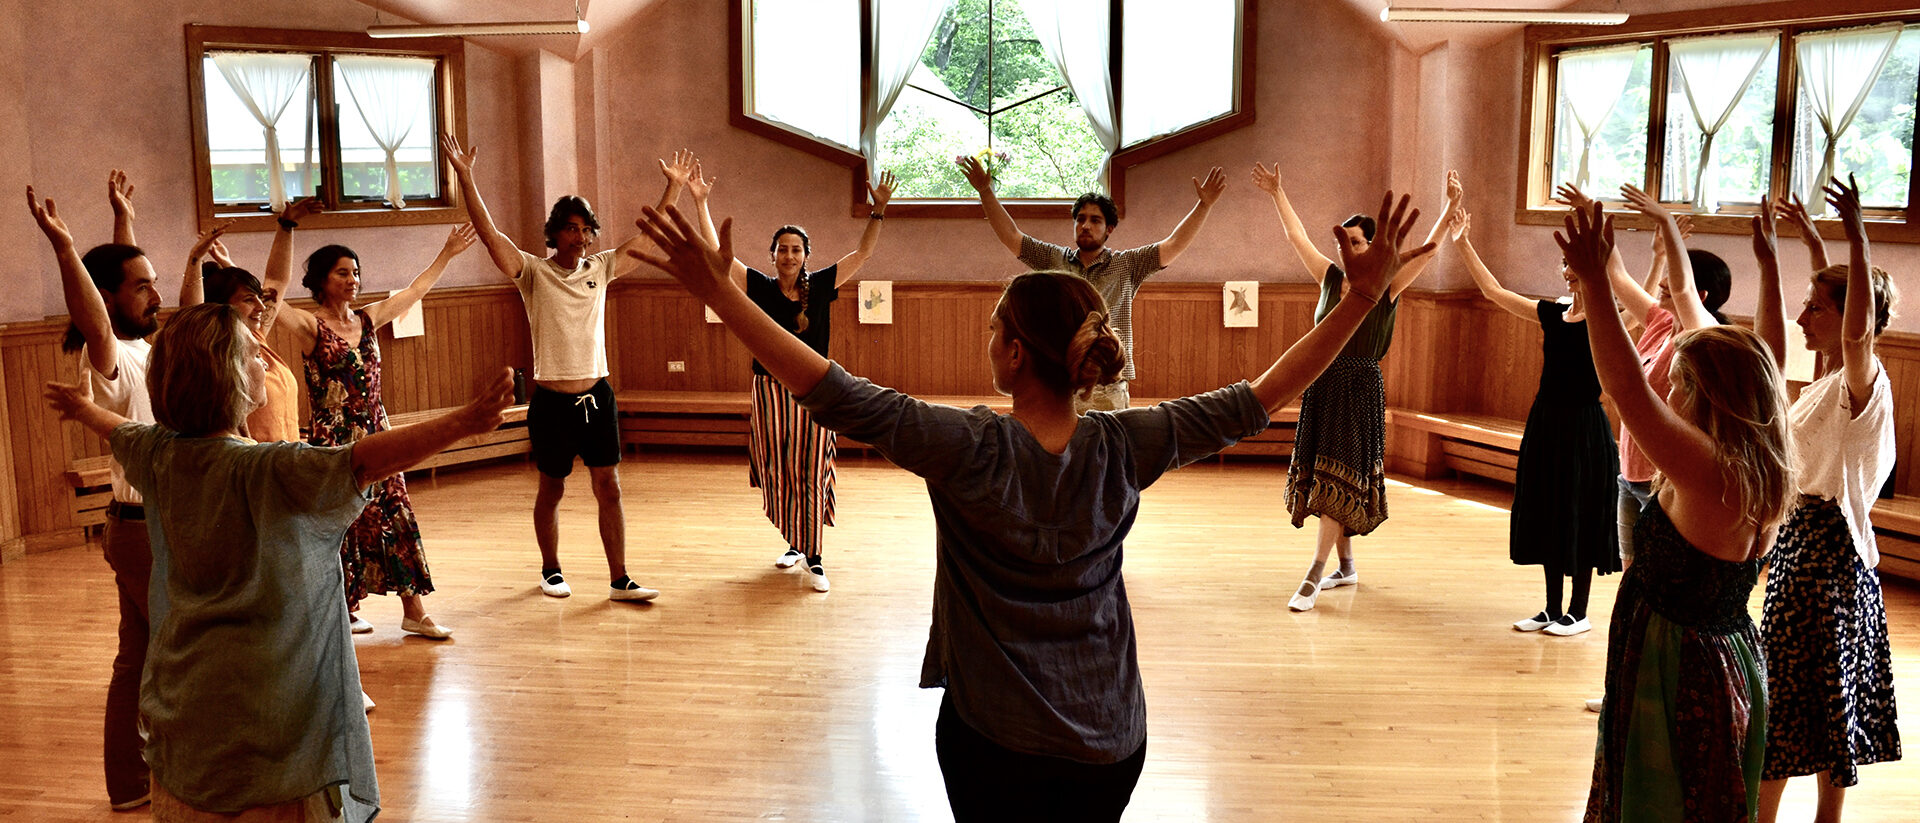 students gathered in a circle in a sunlit room practicing eurythmy; every student has their hands raised over their head